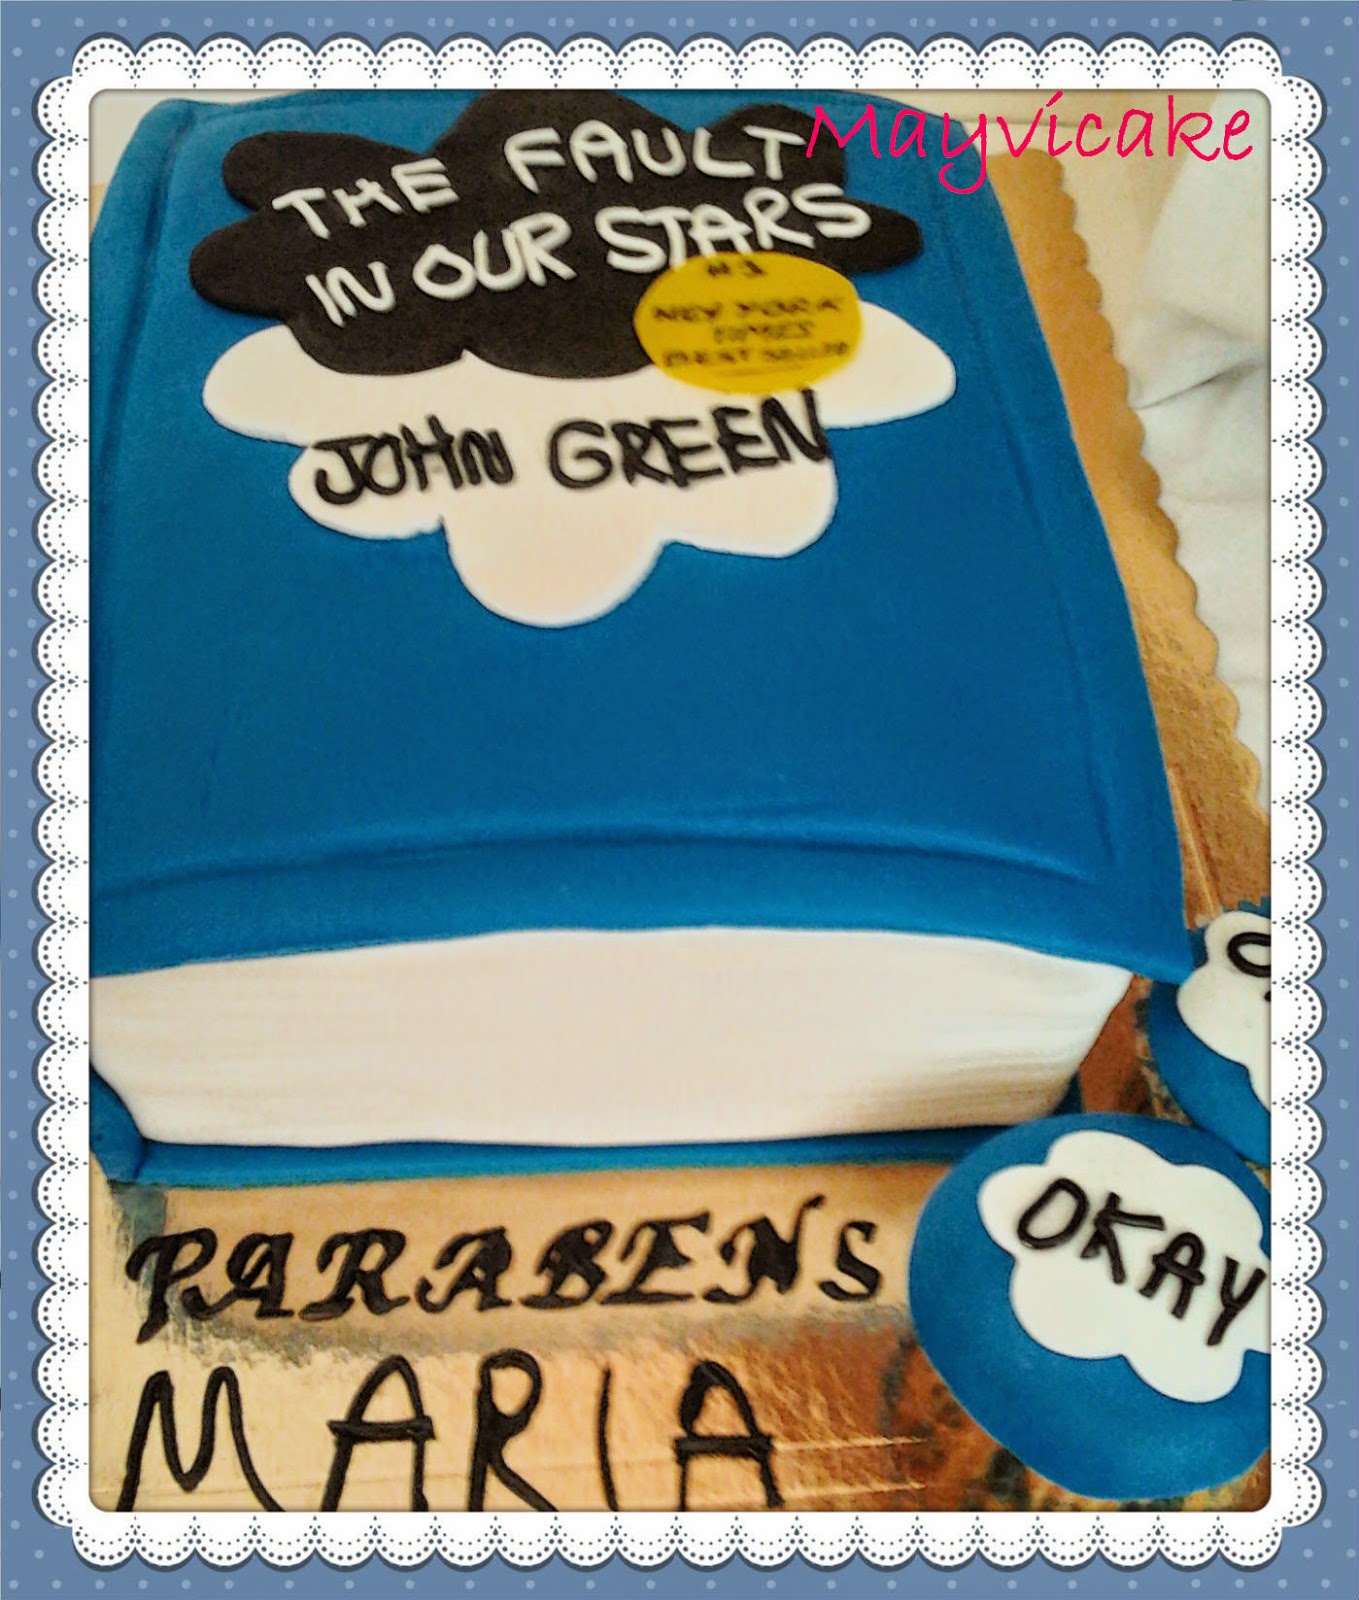 The Fault In Our Stars Cake
